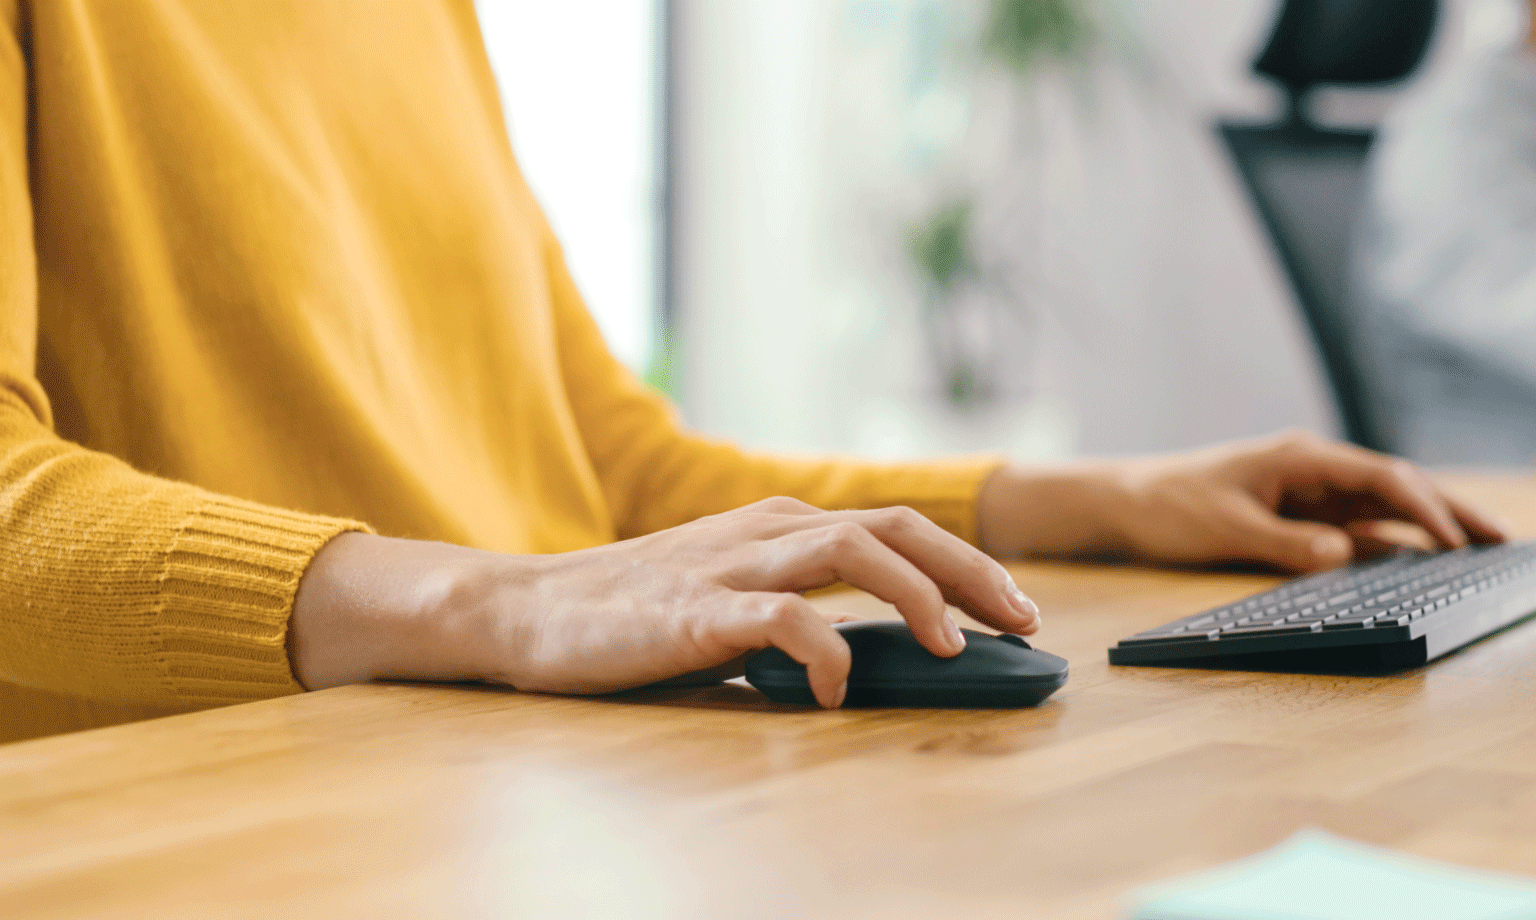 image of hands typing on a keyboard and using a computer mouse